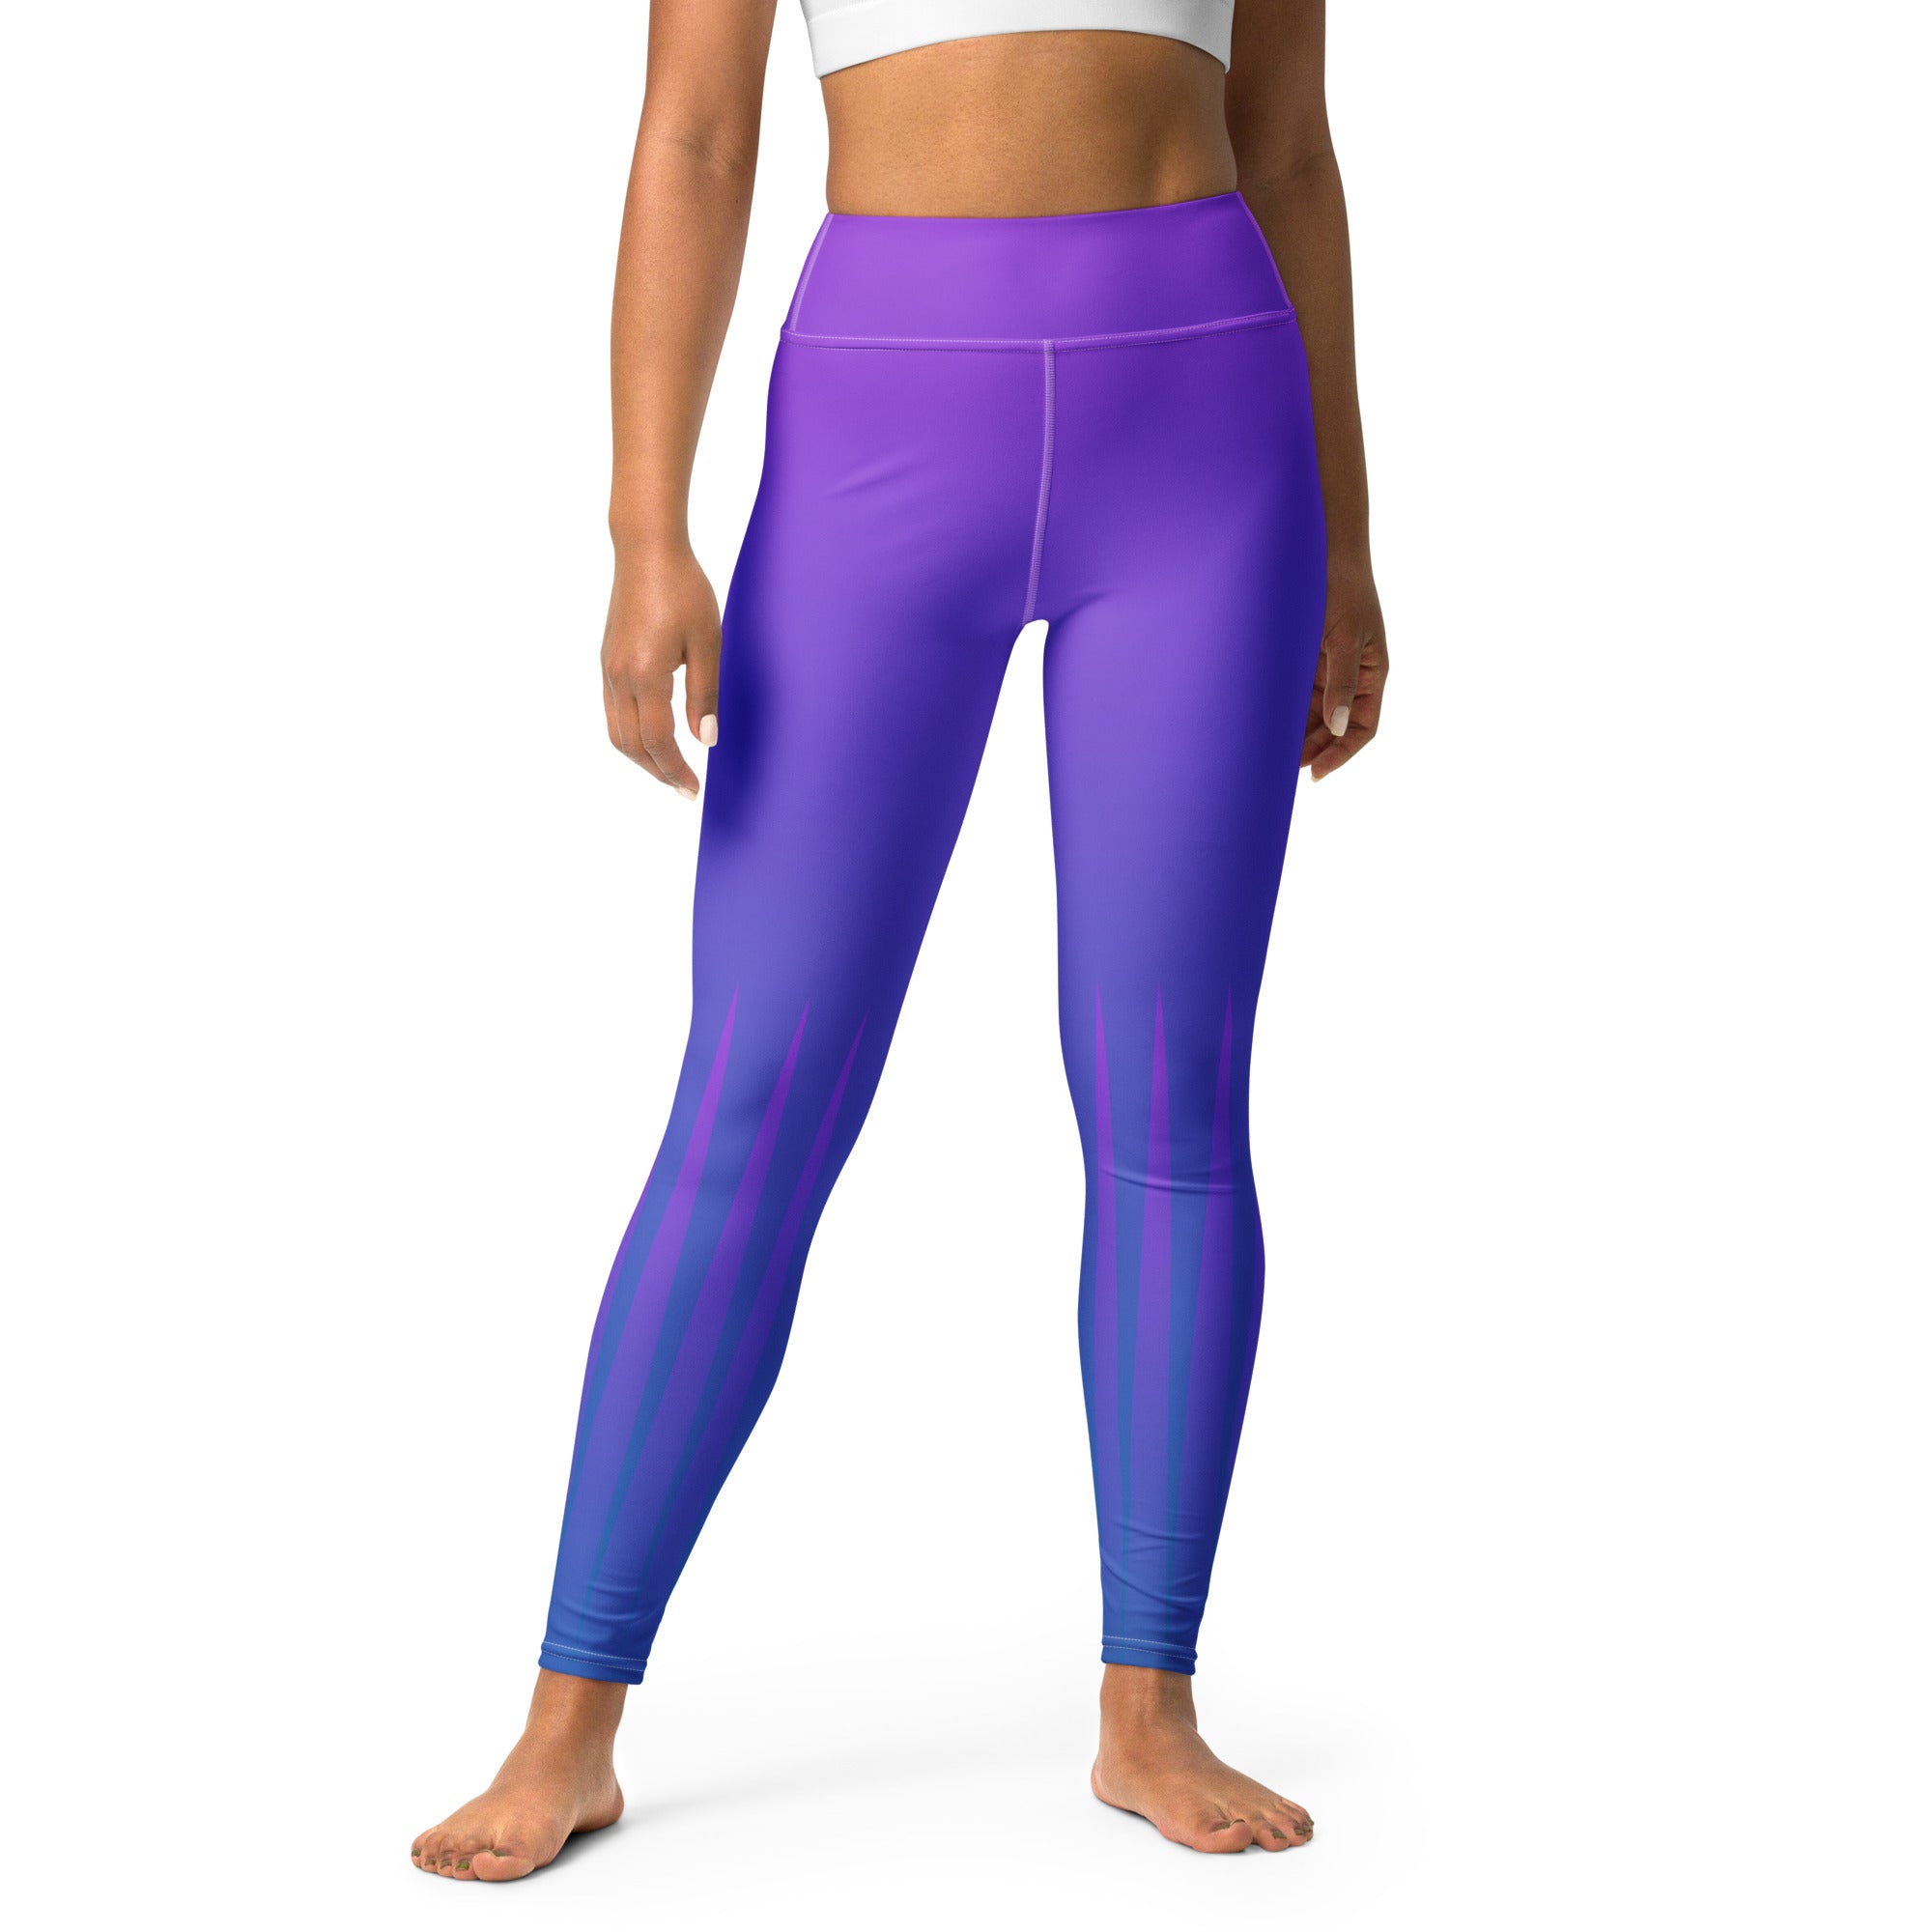 Experience the magic of the Northern Lights in every pose with our Aurora Borealis Gradient Stripe Yoga Leggings.